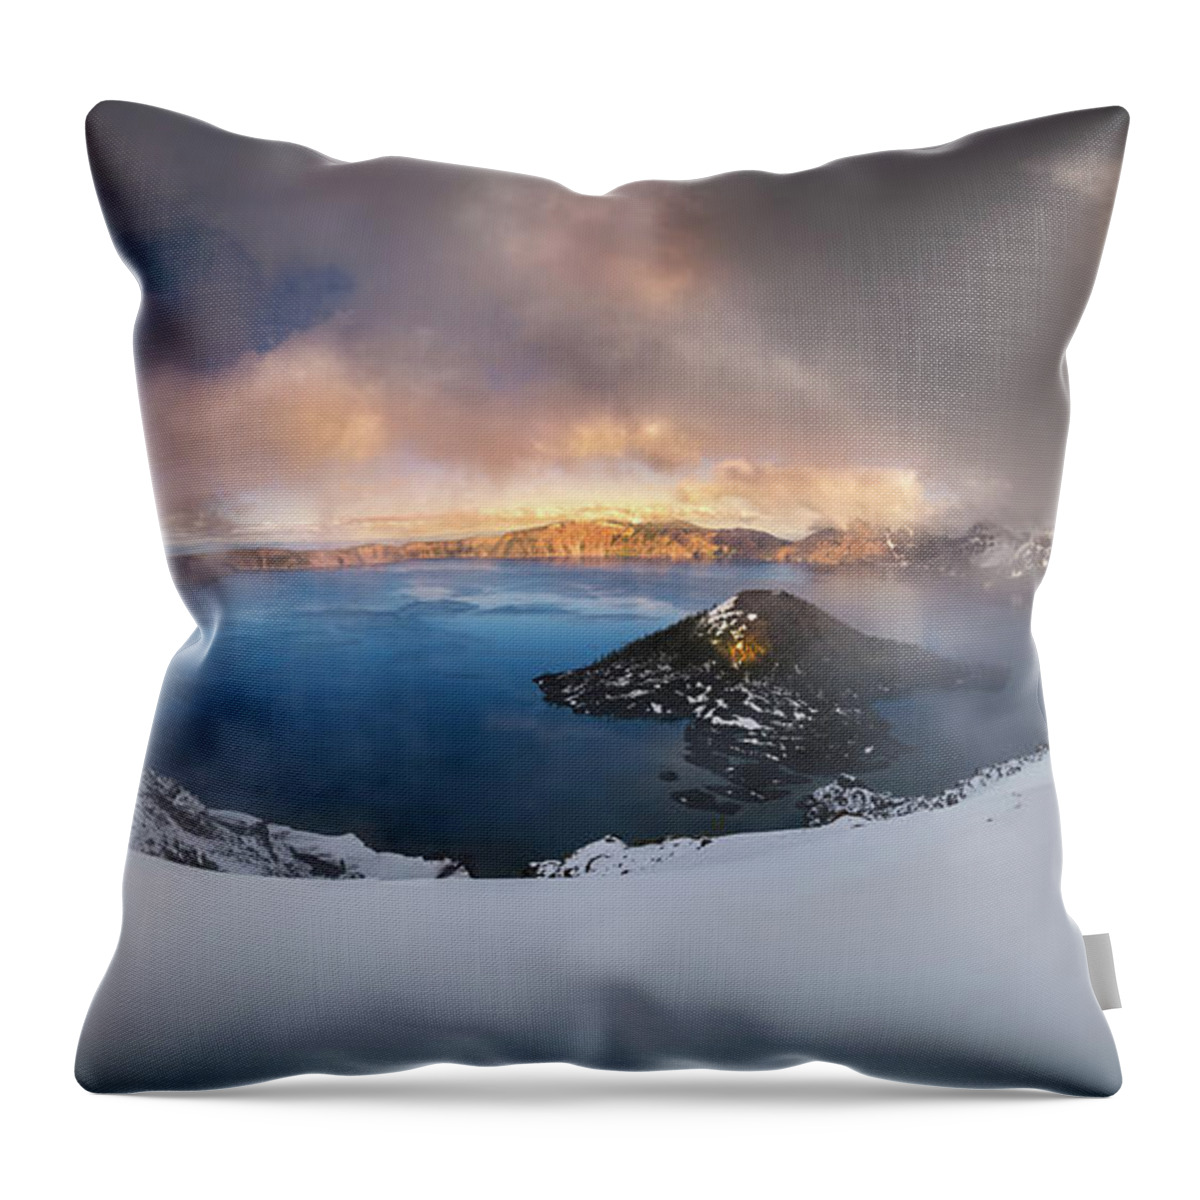 Crater Throw Pillow featuring the photograph Foggy Crater Lake by William Lee